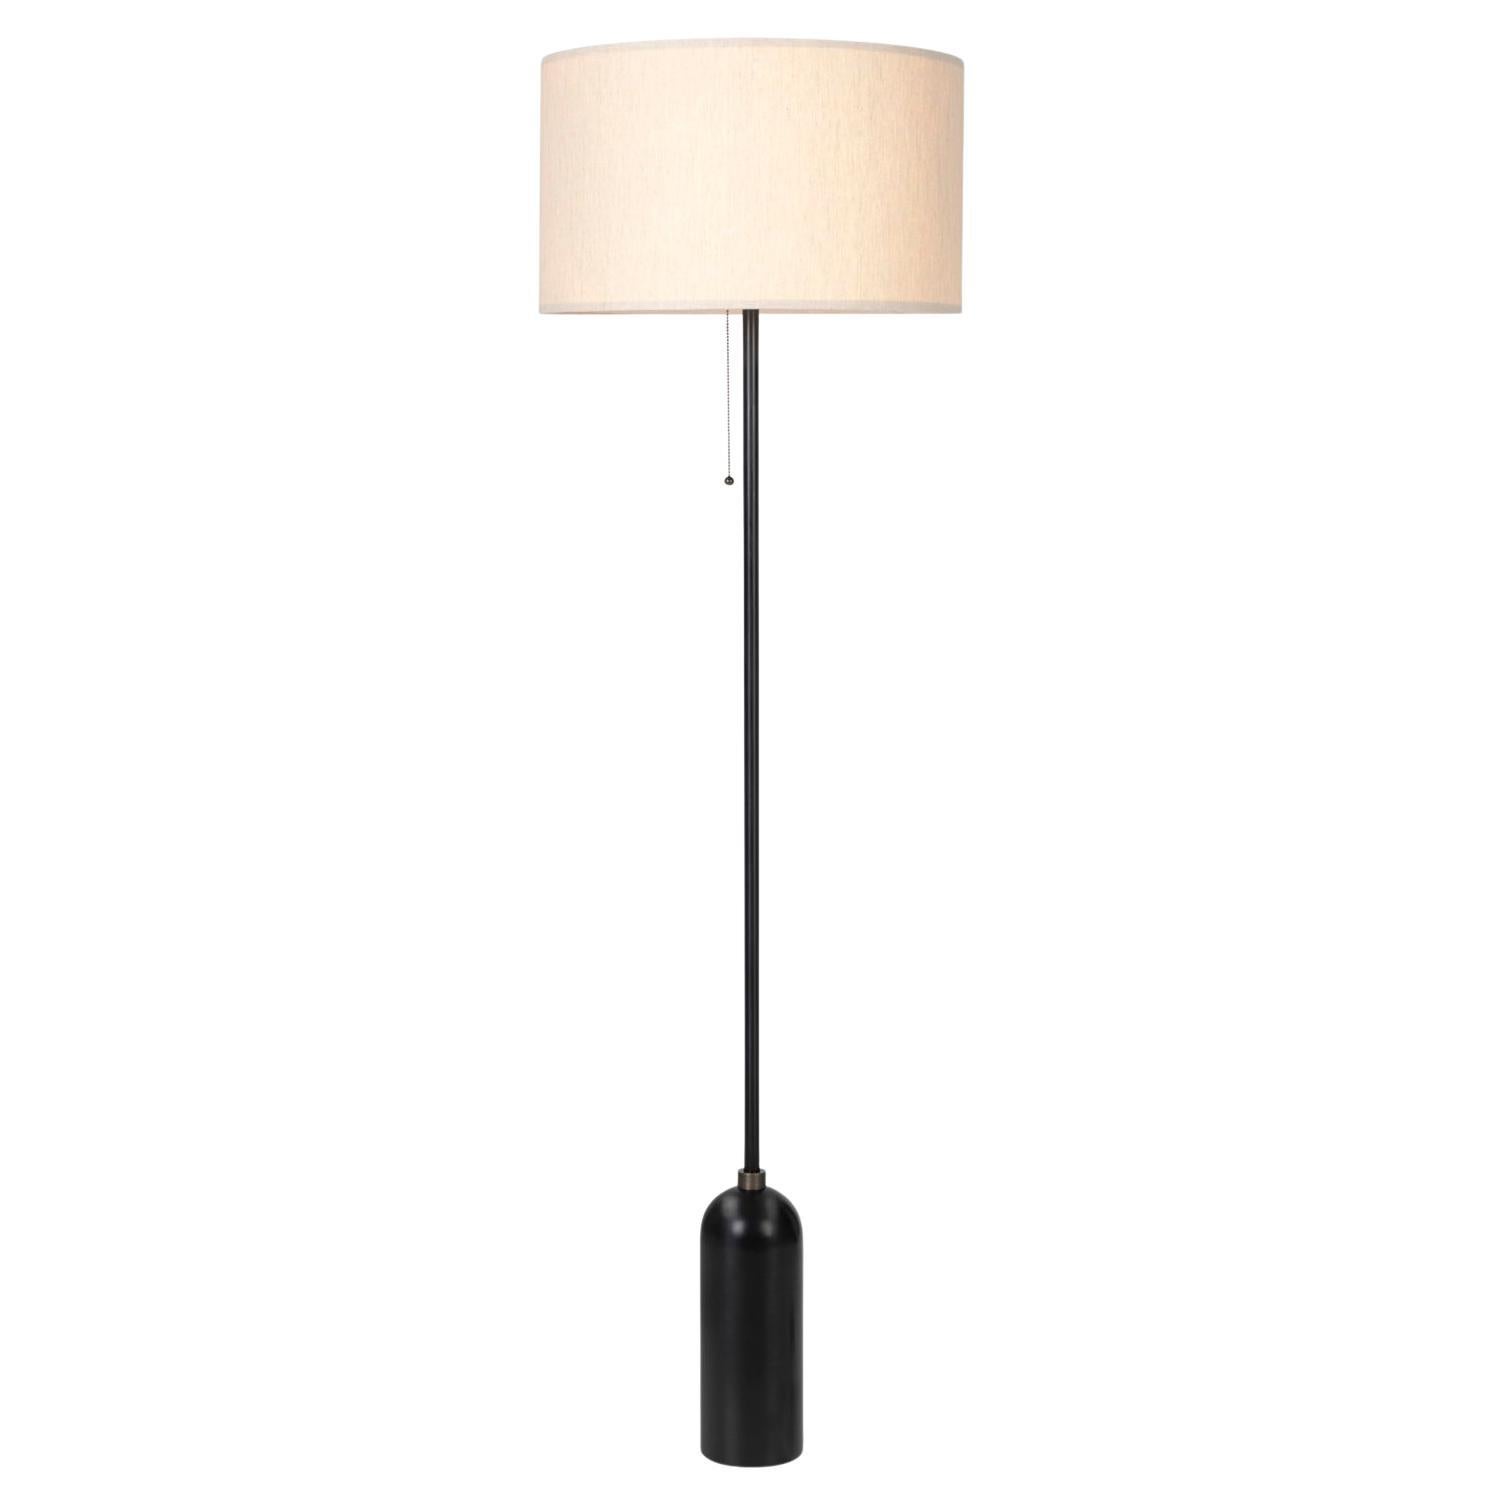 'Gravity' blackened steel floor lamp for Gubi with Canvas Shade.

Executed in blackened steel with a canvas shade perched atop its stem, the Gravity Floor Lamp designed by Space Copenhagen for GUBI contrasts strength and fragility. The lamp has a